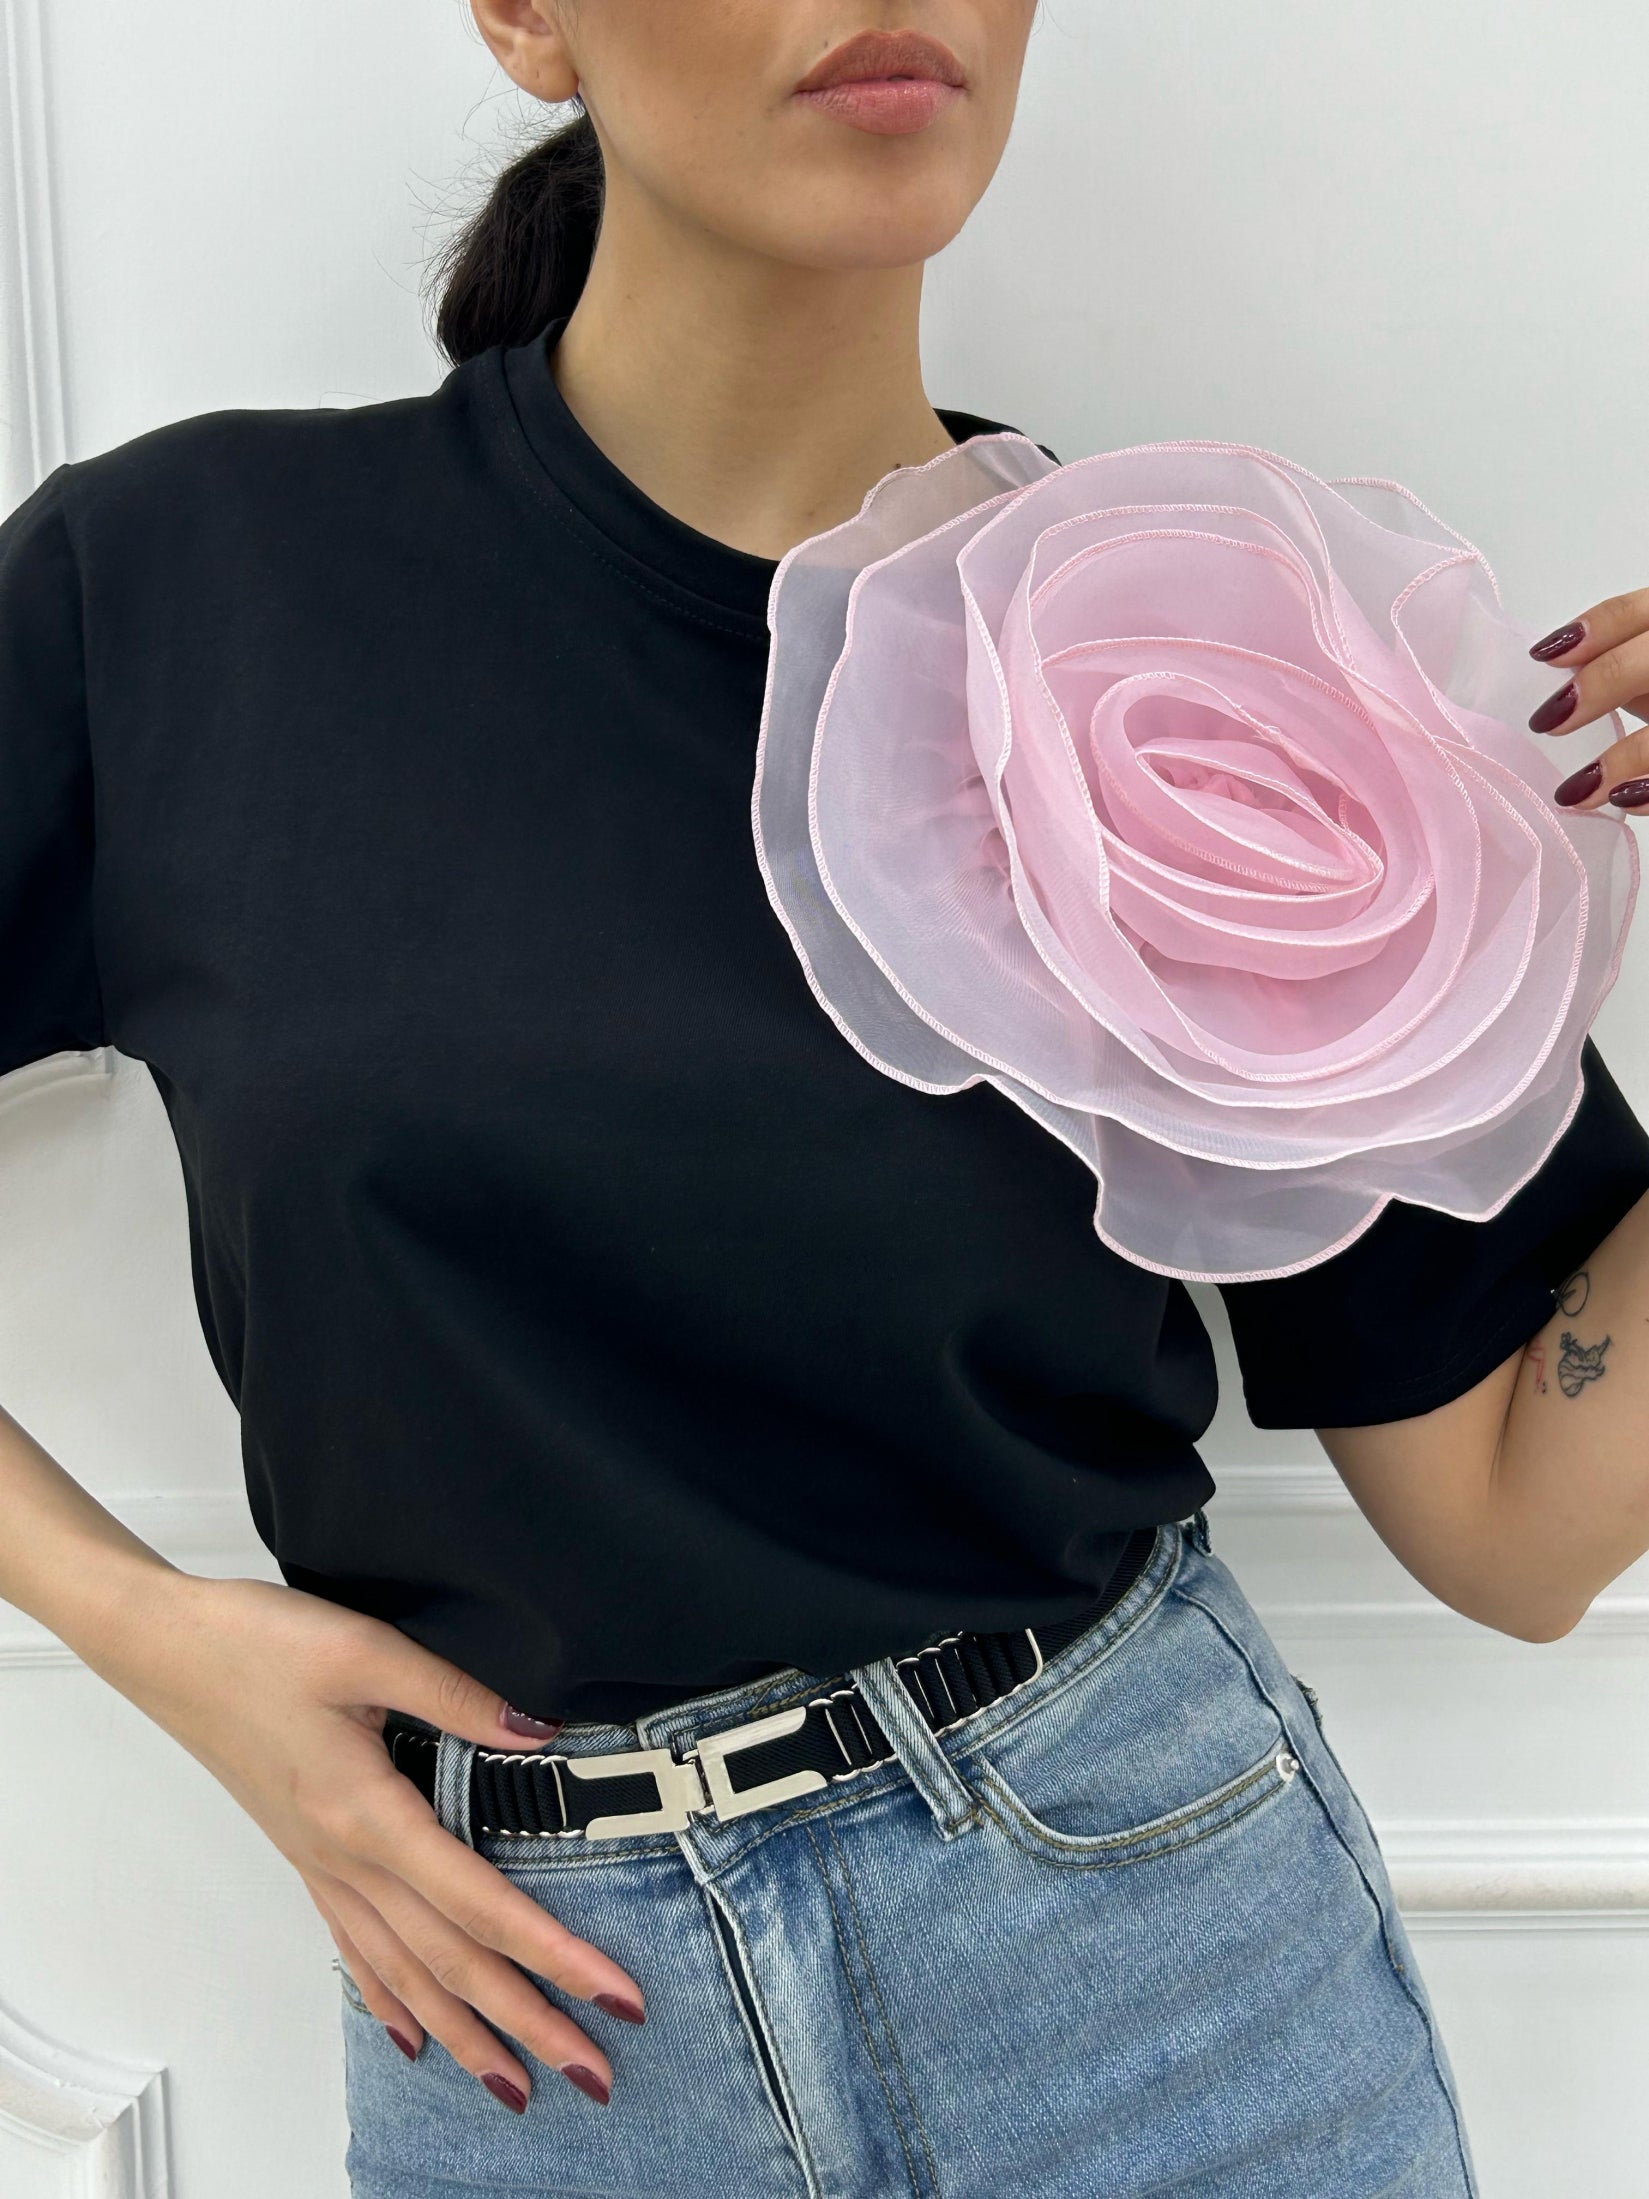 60980-T-SHIRT-CON-ROSA-IN-TULLE-NEW-COLLECTION-T-SHIRT-CON-ROSA-IN-TULLE-NEW-COLLECTION.jpg